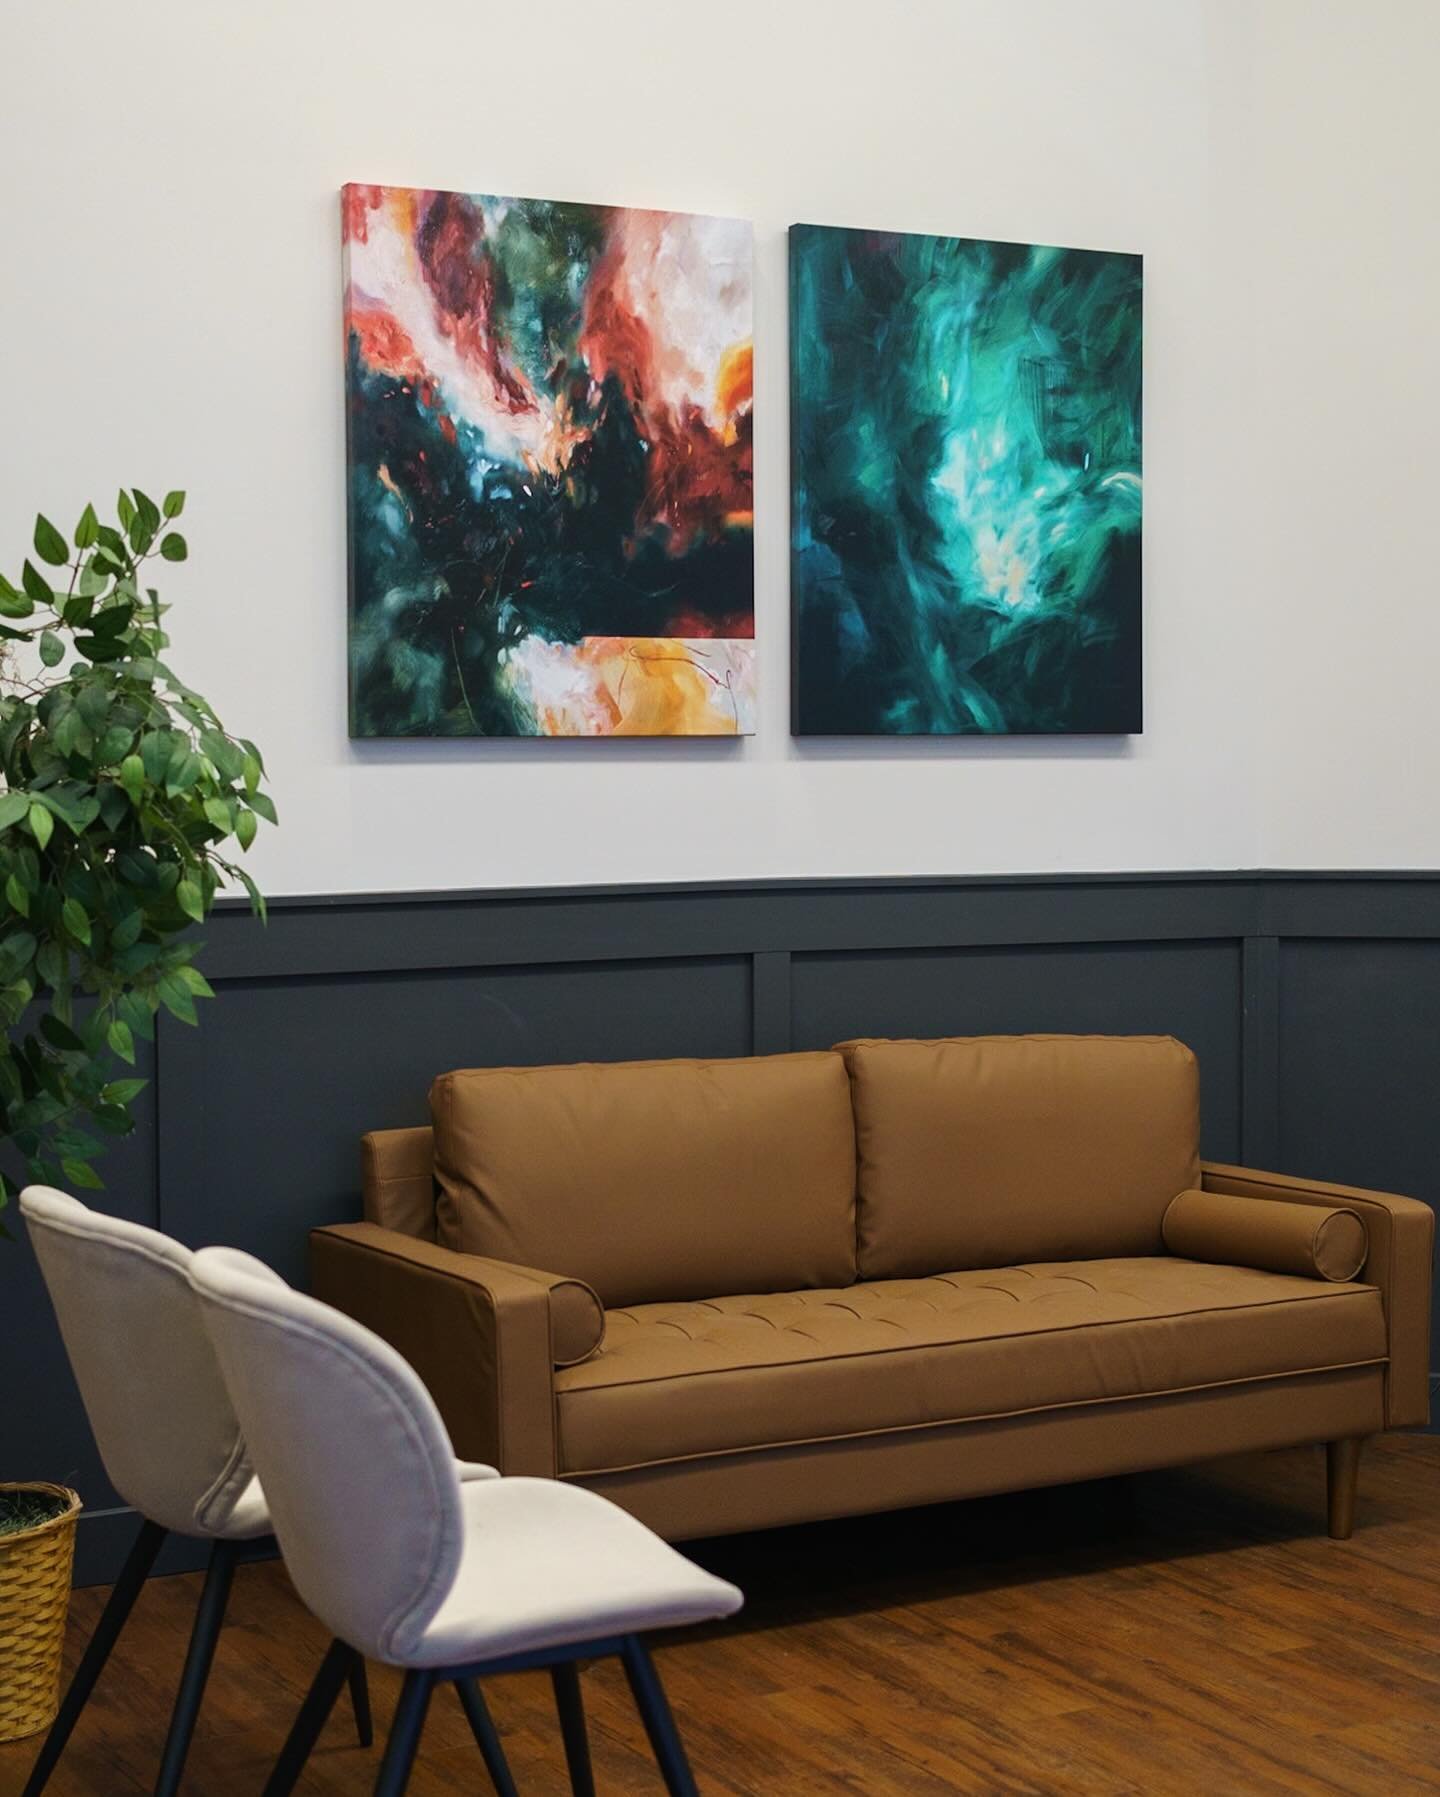 Large-scale stretched canvas prints on display at @mainstreetchurch in Chilliwack, BC 🕊️
__________

There&rsquo;s nearly 30 paintings available as canvas prints on my website ranging from 5x7in to 48x60in, depending on the piece. They&rsquo;re avai